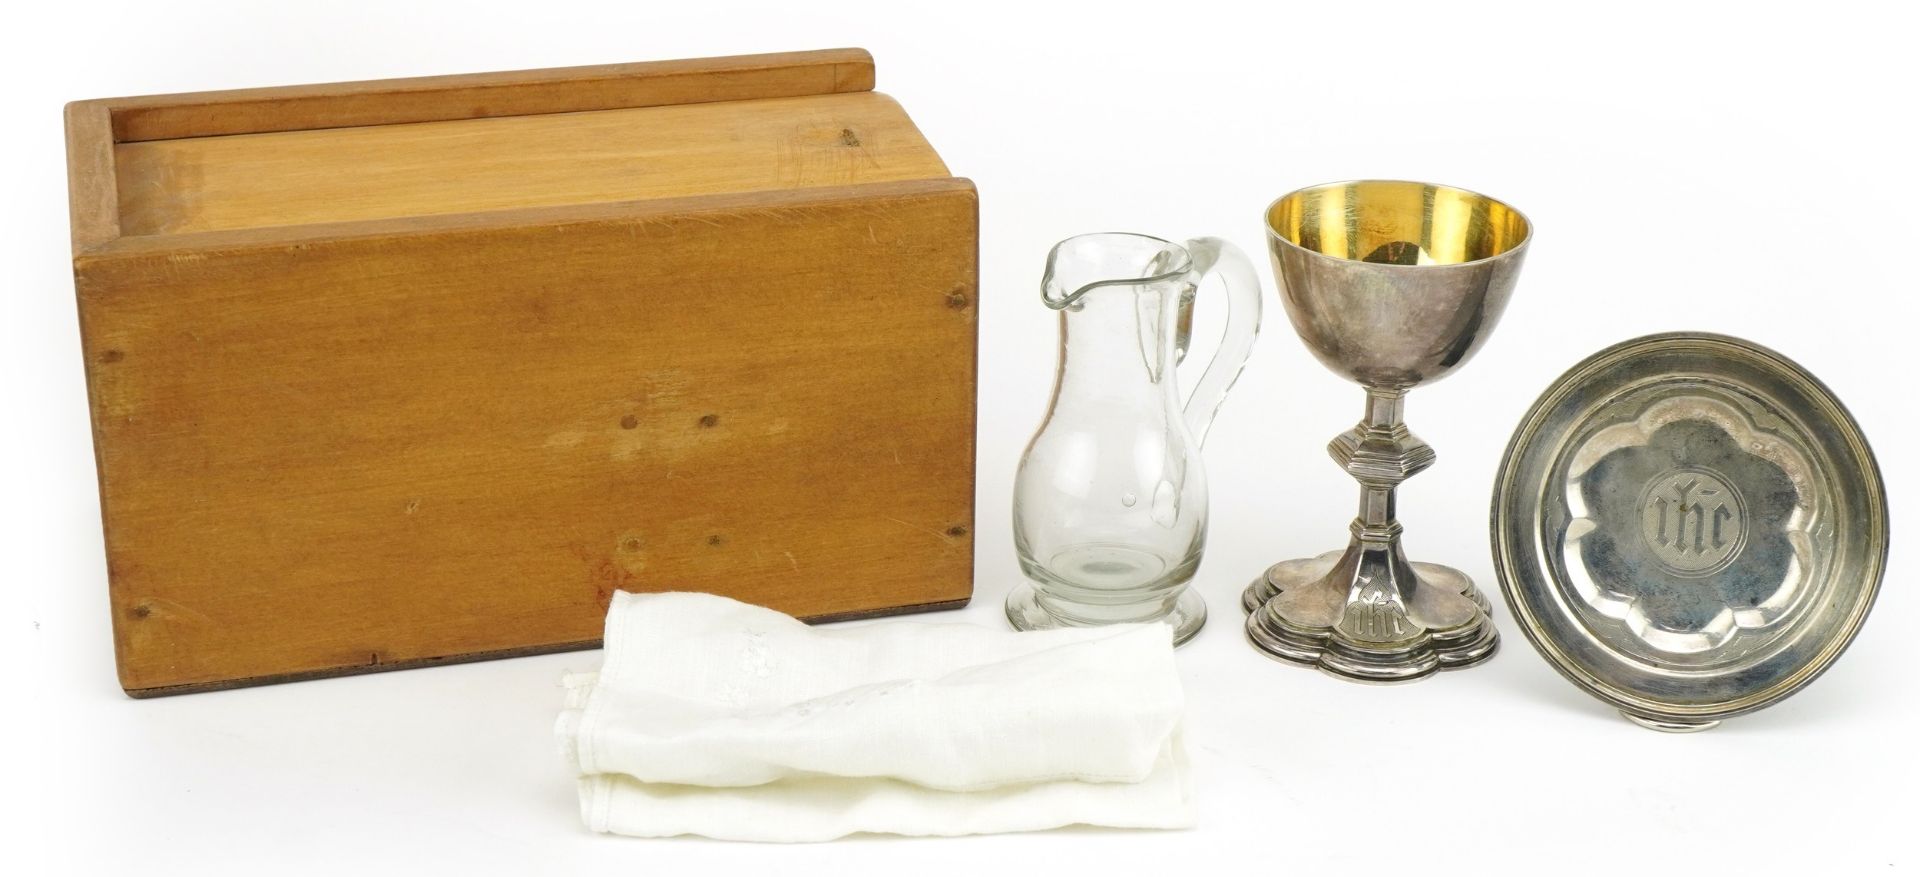 Richards & Brown, Victorian ecclesiastical silver holy communion set comprising chalice and plate - Image 2 of 7